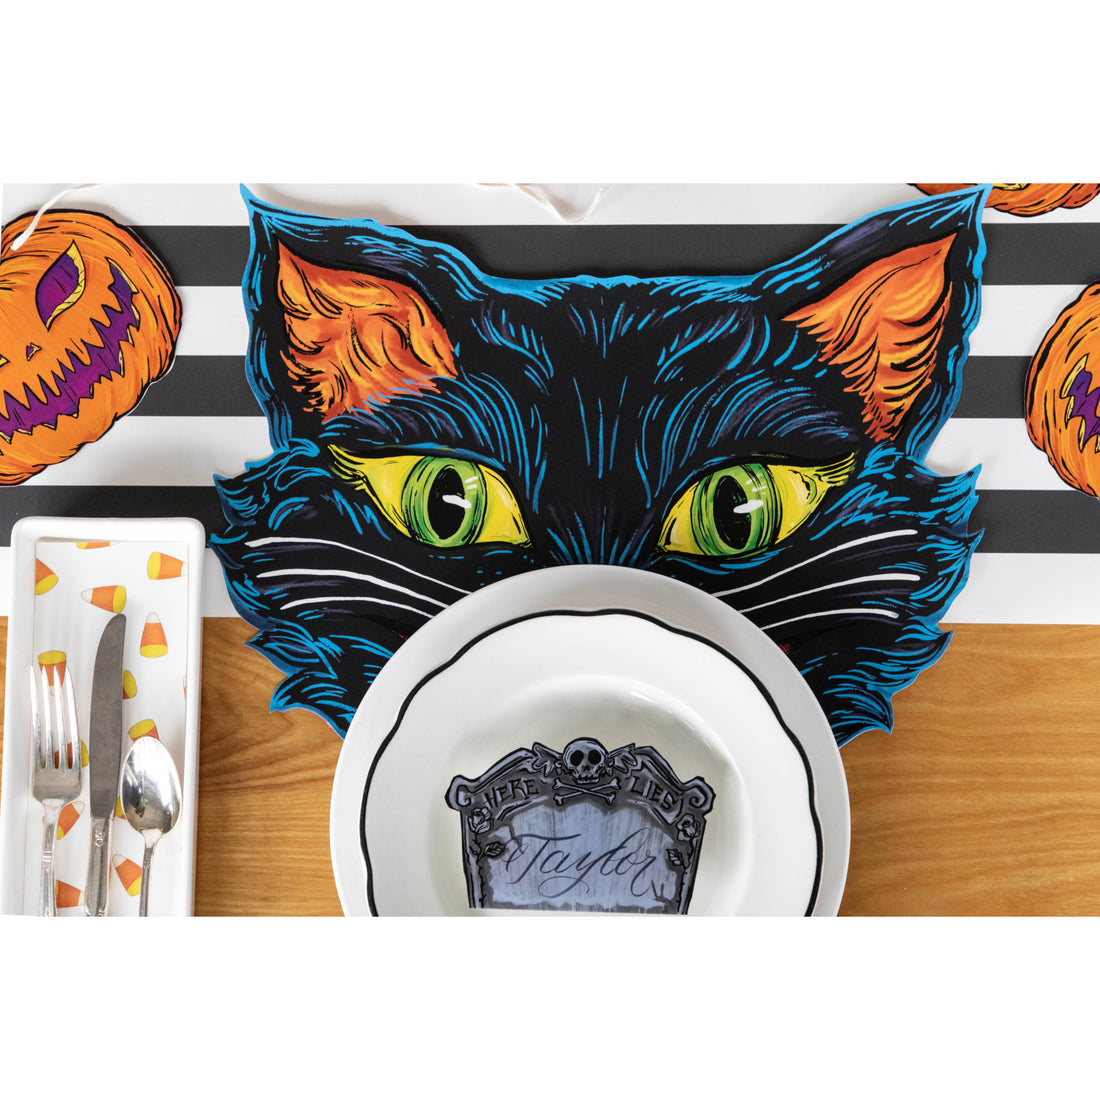 The Die-cut Black Cat Placemat under a spooky Halloween place setting, from above.